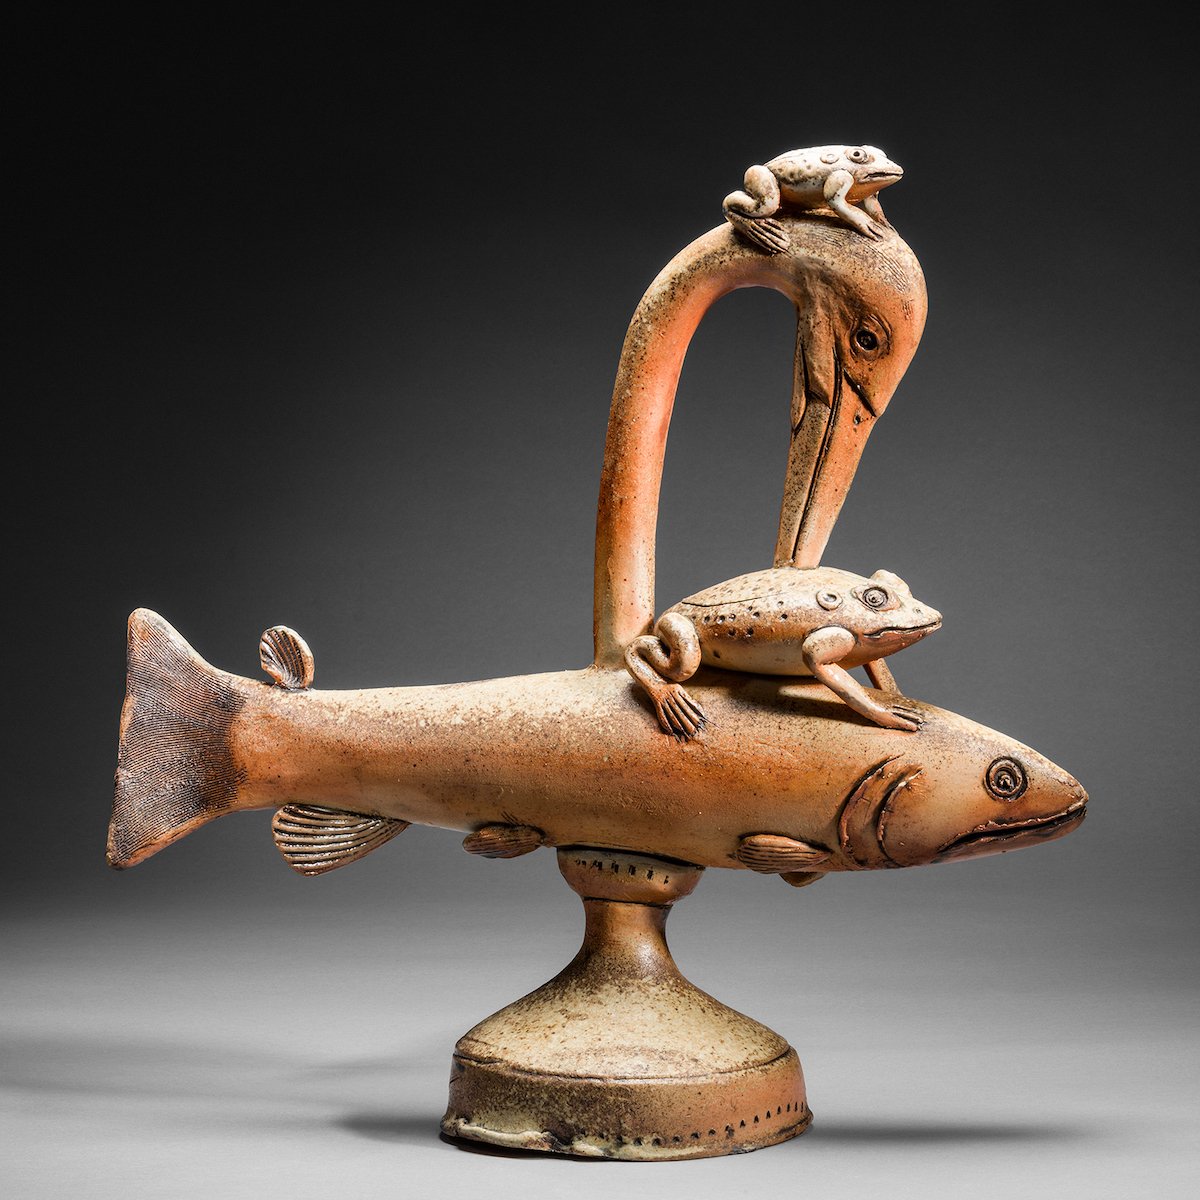    Fish Frog Heron Frog  , 17"H x 17”L x 6"D, wood fired stoneware 